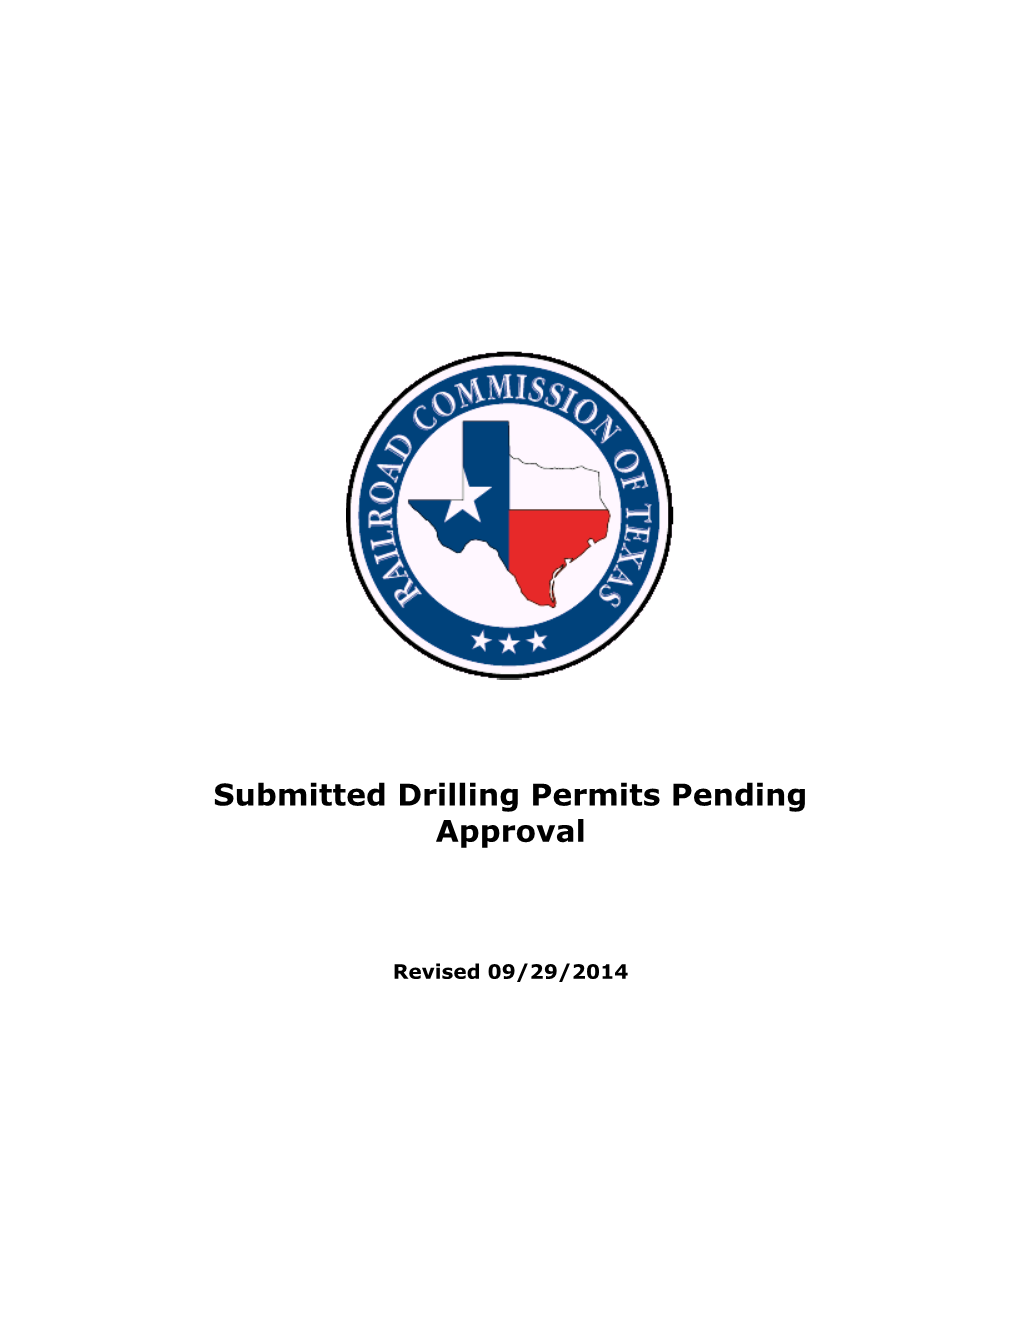 Submitted Drilling Permits Pending Approval